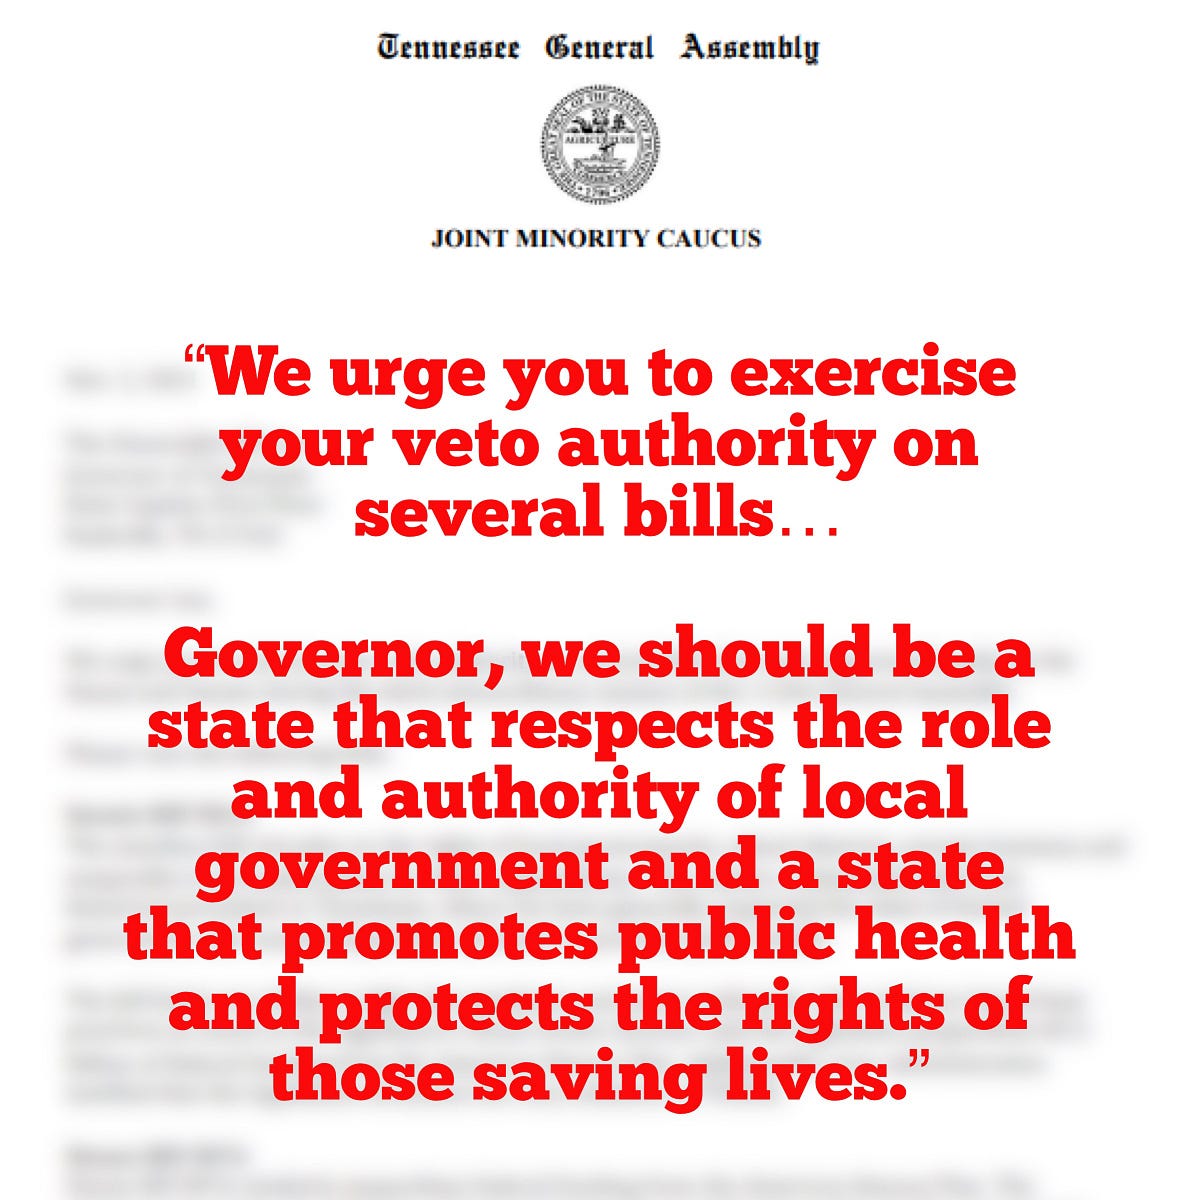 Lawmakers Urge Governor To Veto Anti Public Health Bills Stripping Rights From Local Governments 4576